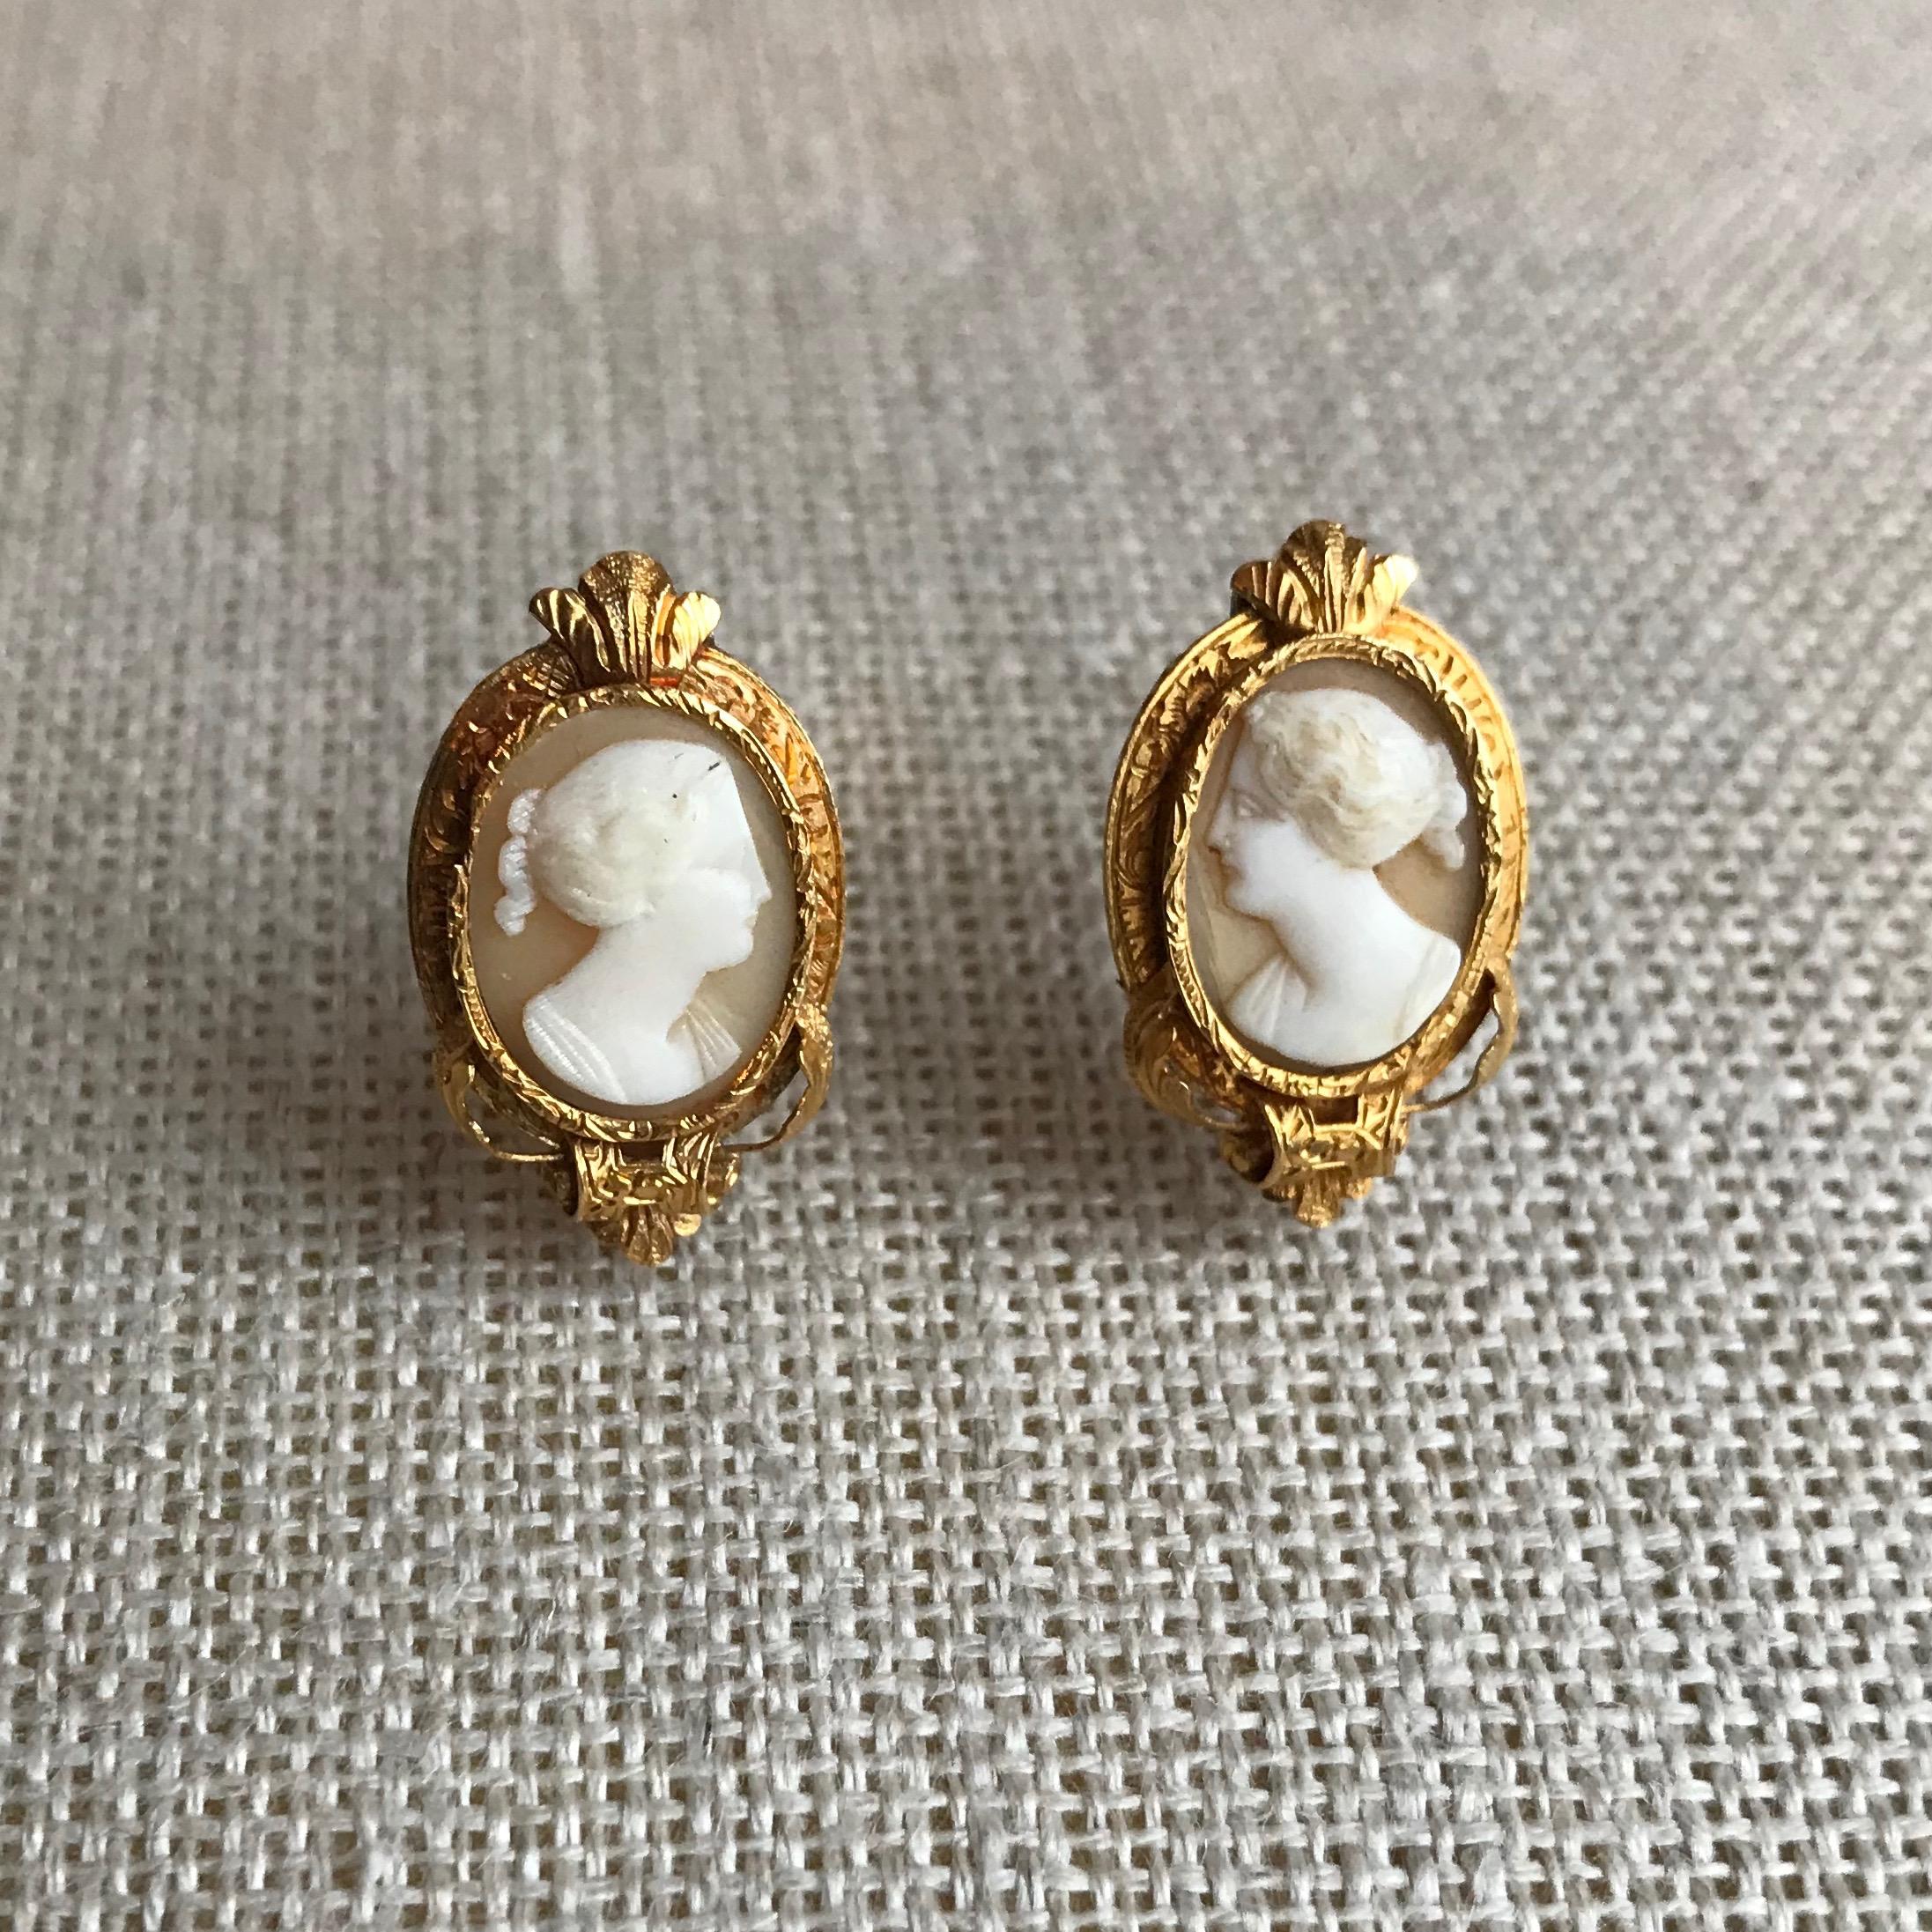  Froment-Meurice Set in 18 Carat, Yellow Gold and Cameo, 19th Century 8